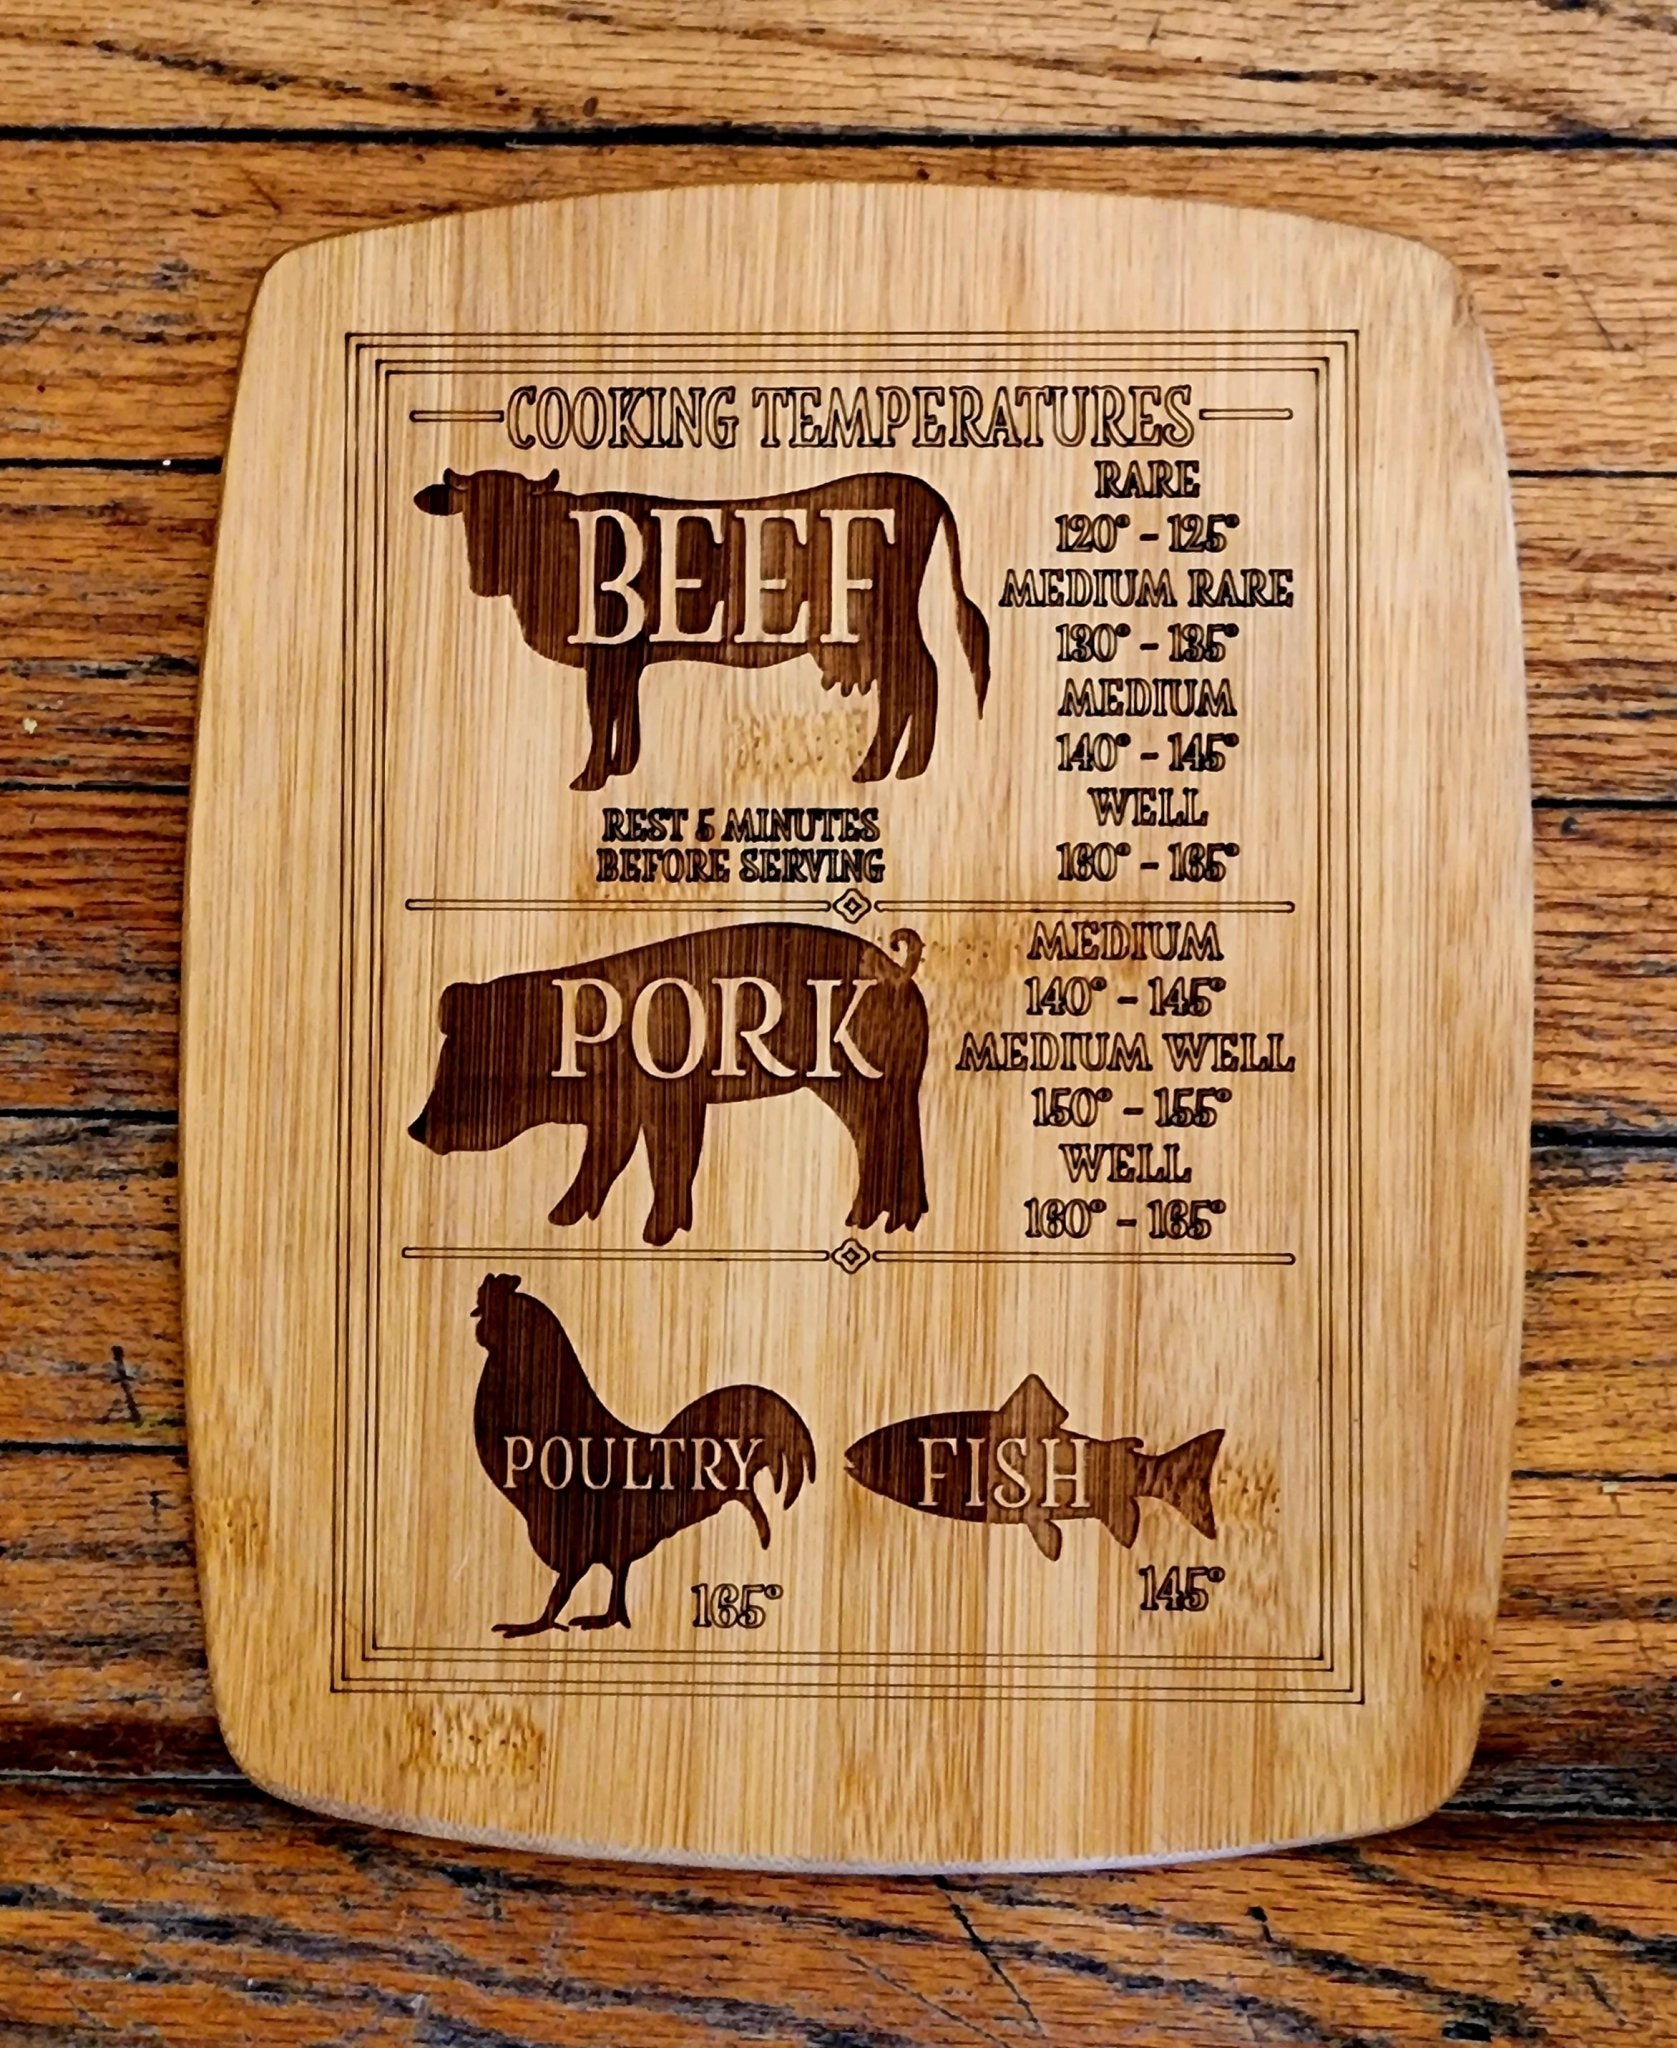 Mother's Day Gift Personalized Cutting Board